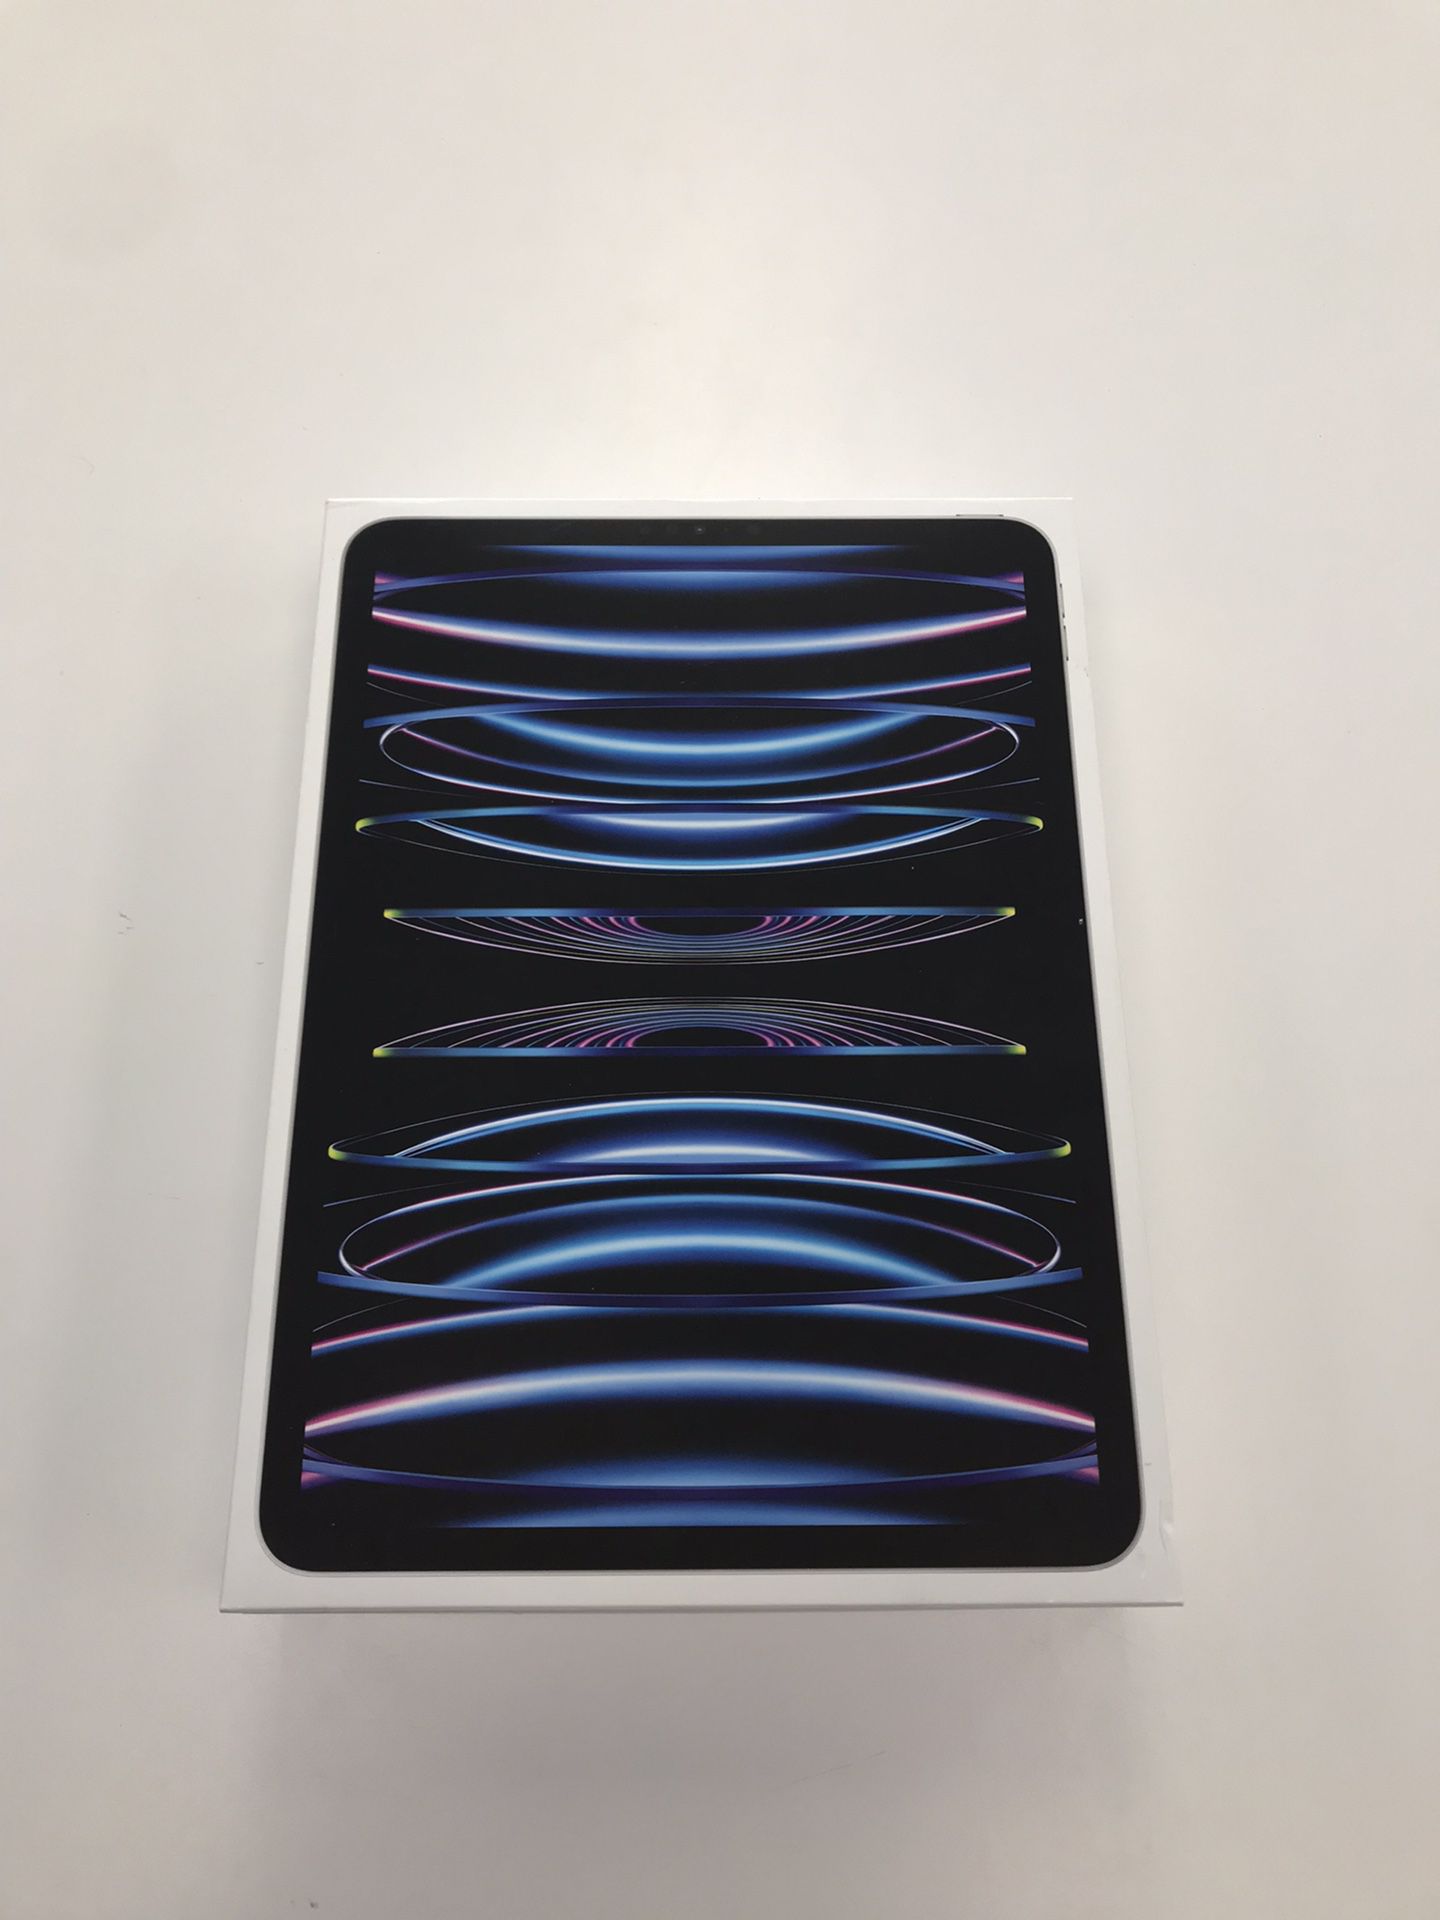 Apple iPad Pro 11 inch 4th Generation (M2 Chip) Tablet - Pay $1 Today to Take it Home and Pay the Rest Later!